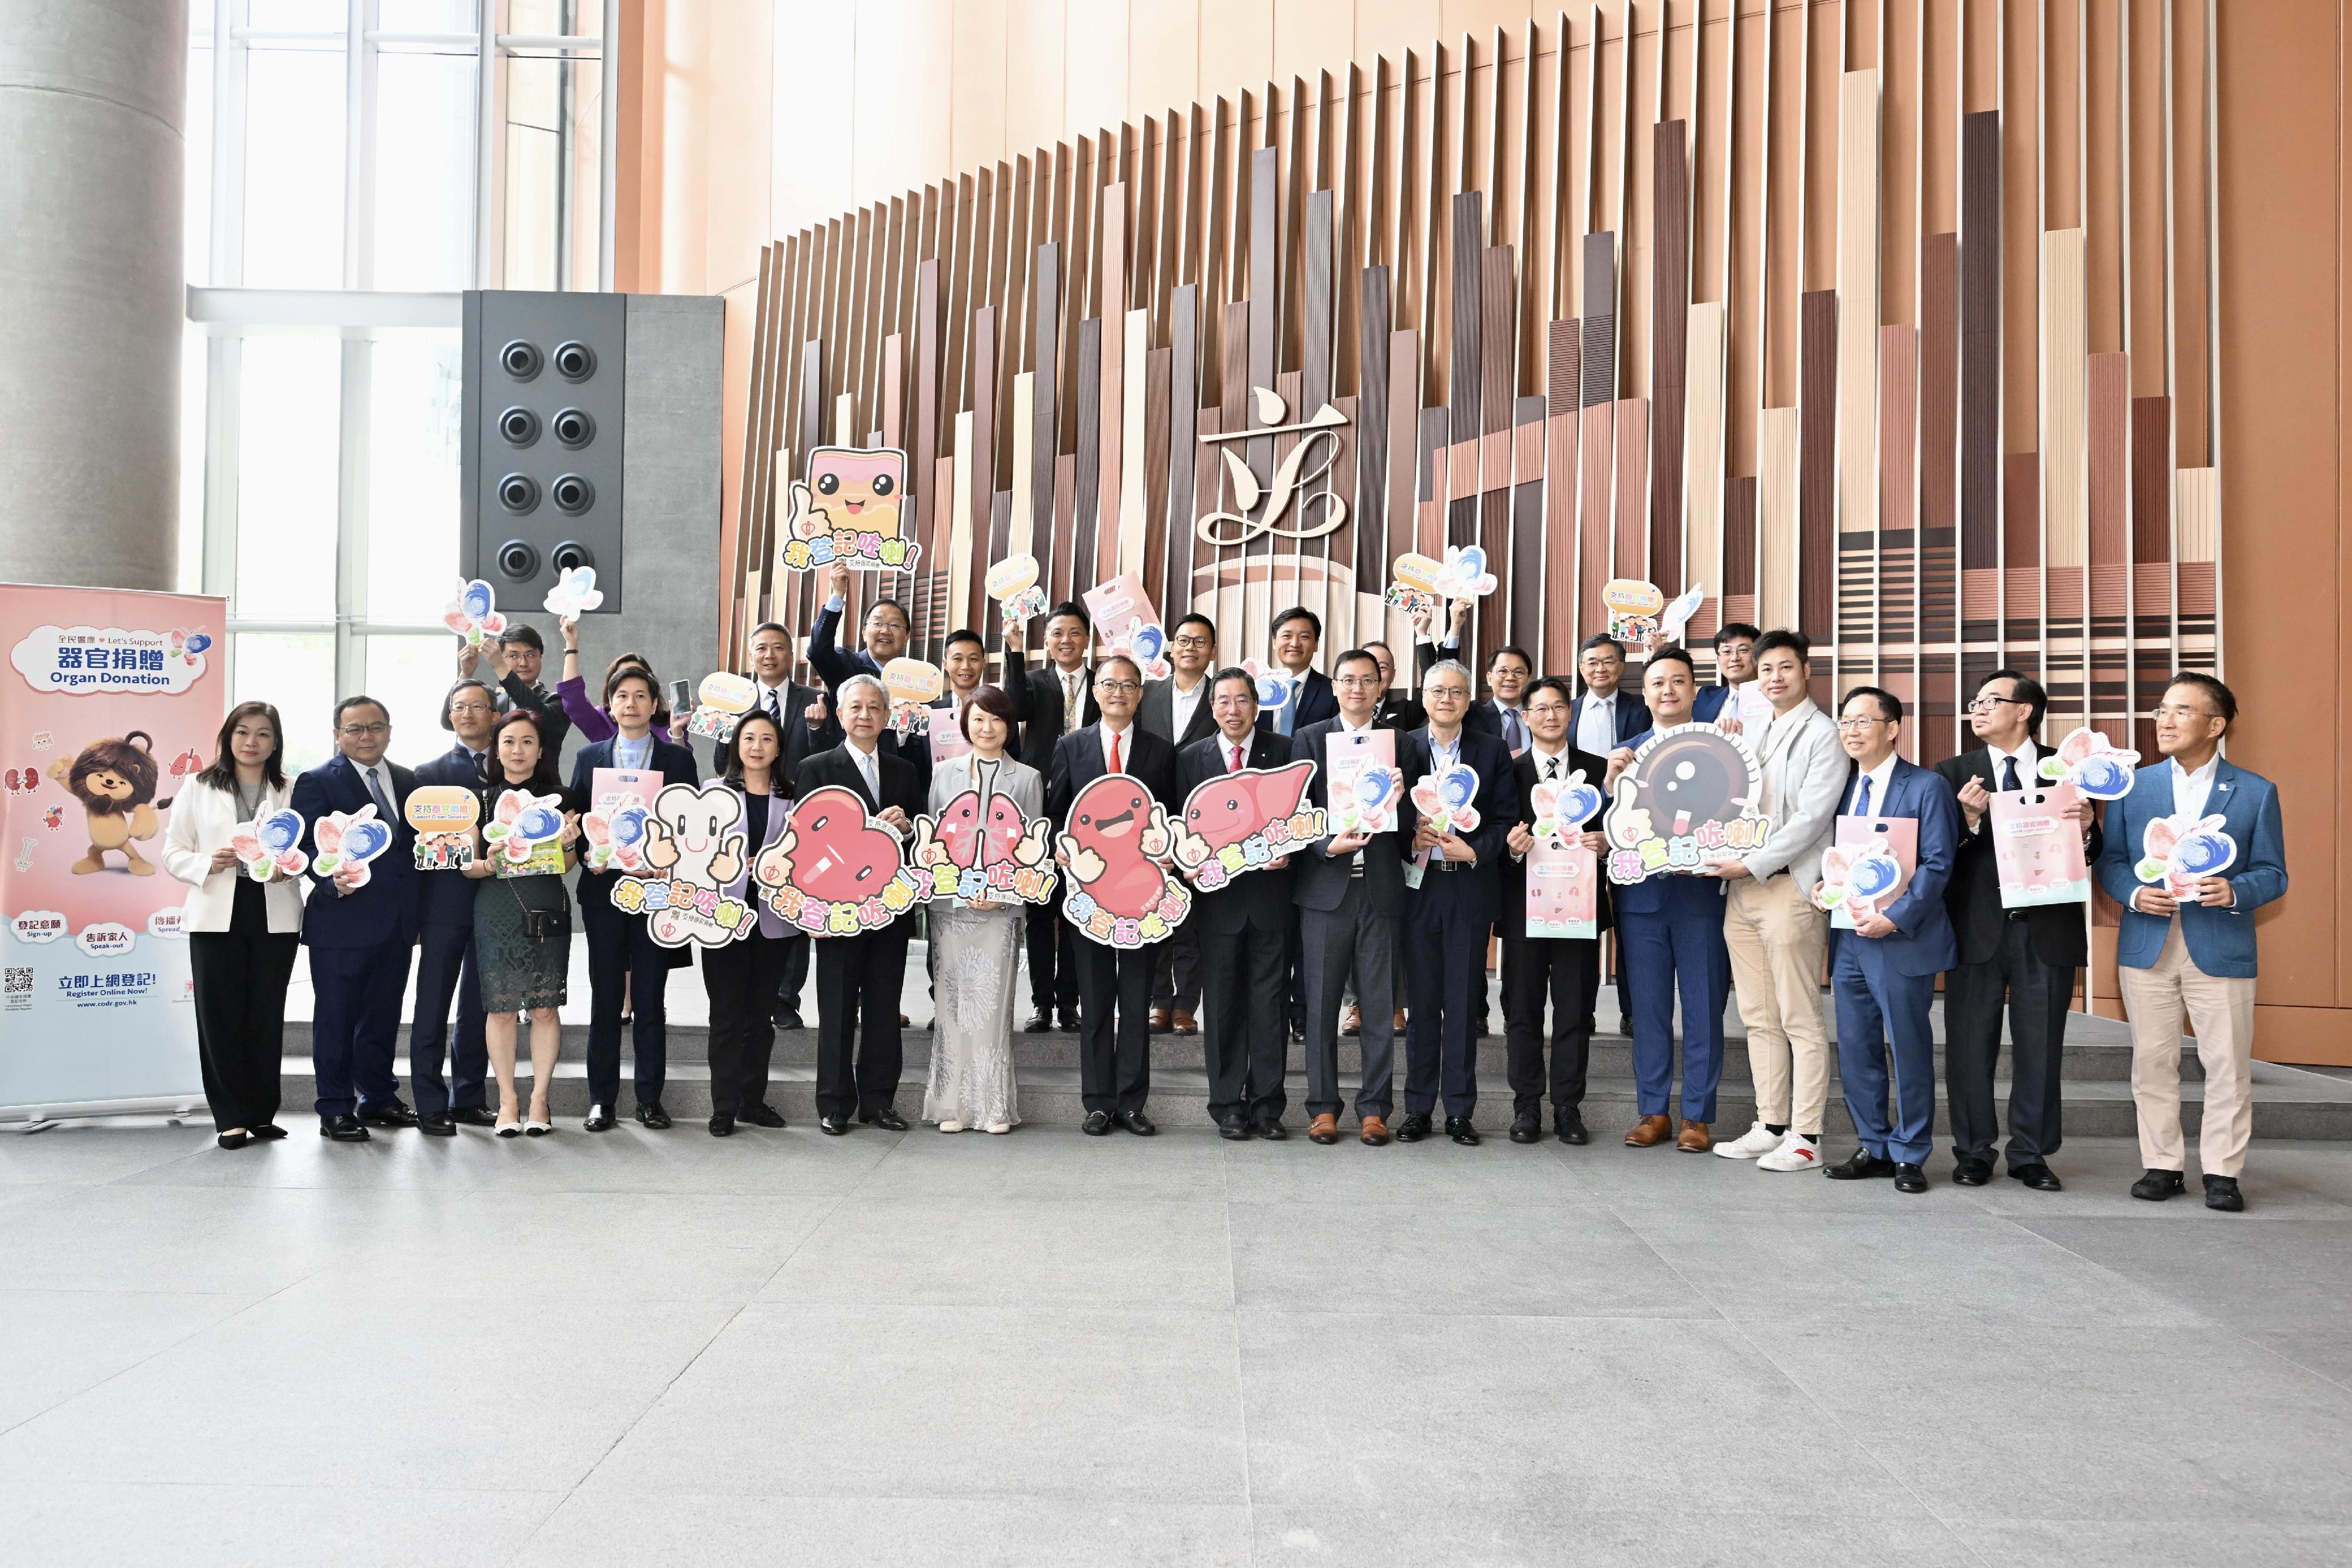 The Secretary for Health, Professor Lo Chung-mau, attends an organ donation promotion event at the Legislative Council (LegCo) Complex today (June 7). Together with the President and Members of the LegCo, Professor Lo called for the public's continued support for organ donations.